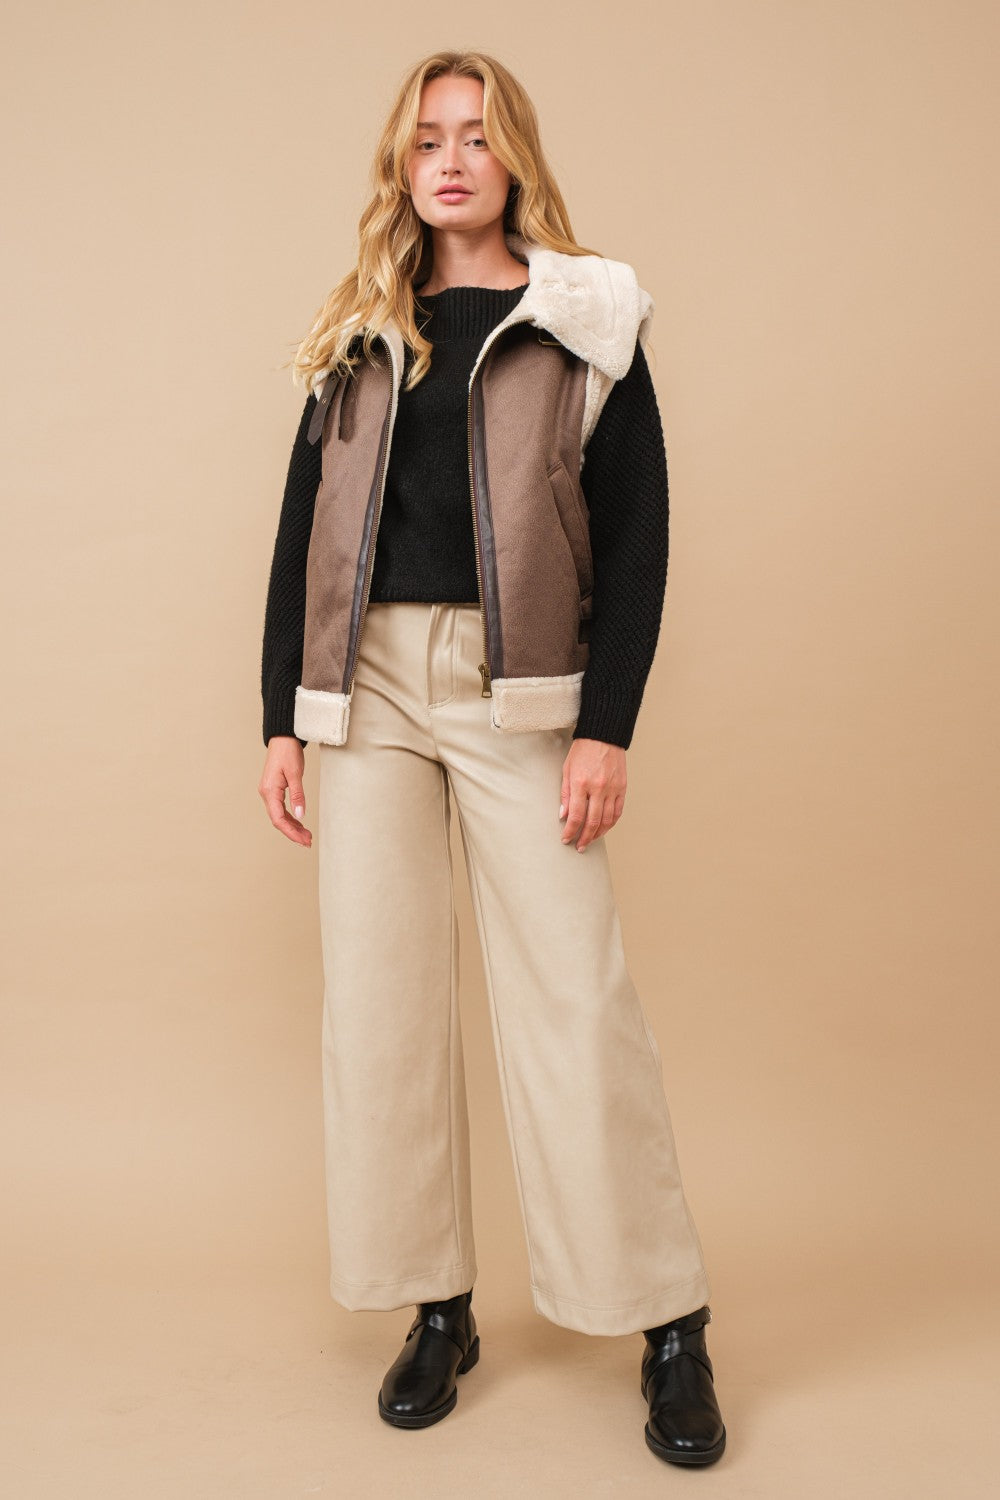 Faux leather with fleece lining vest